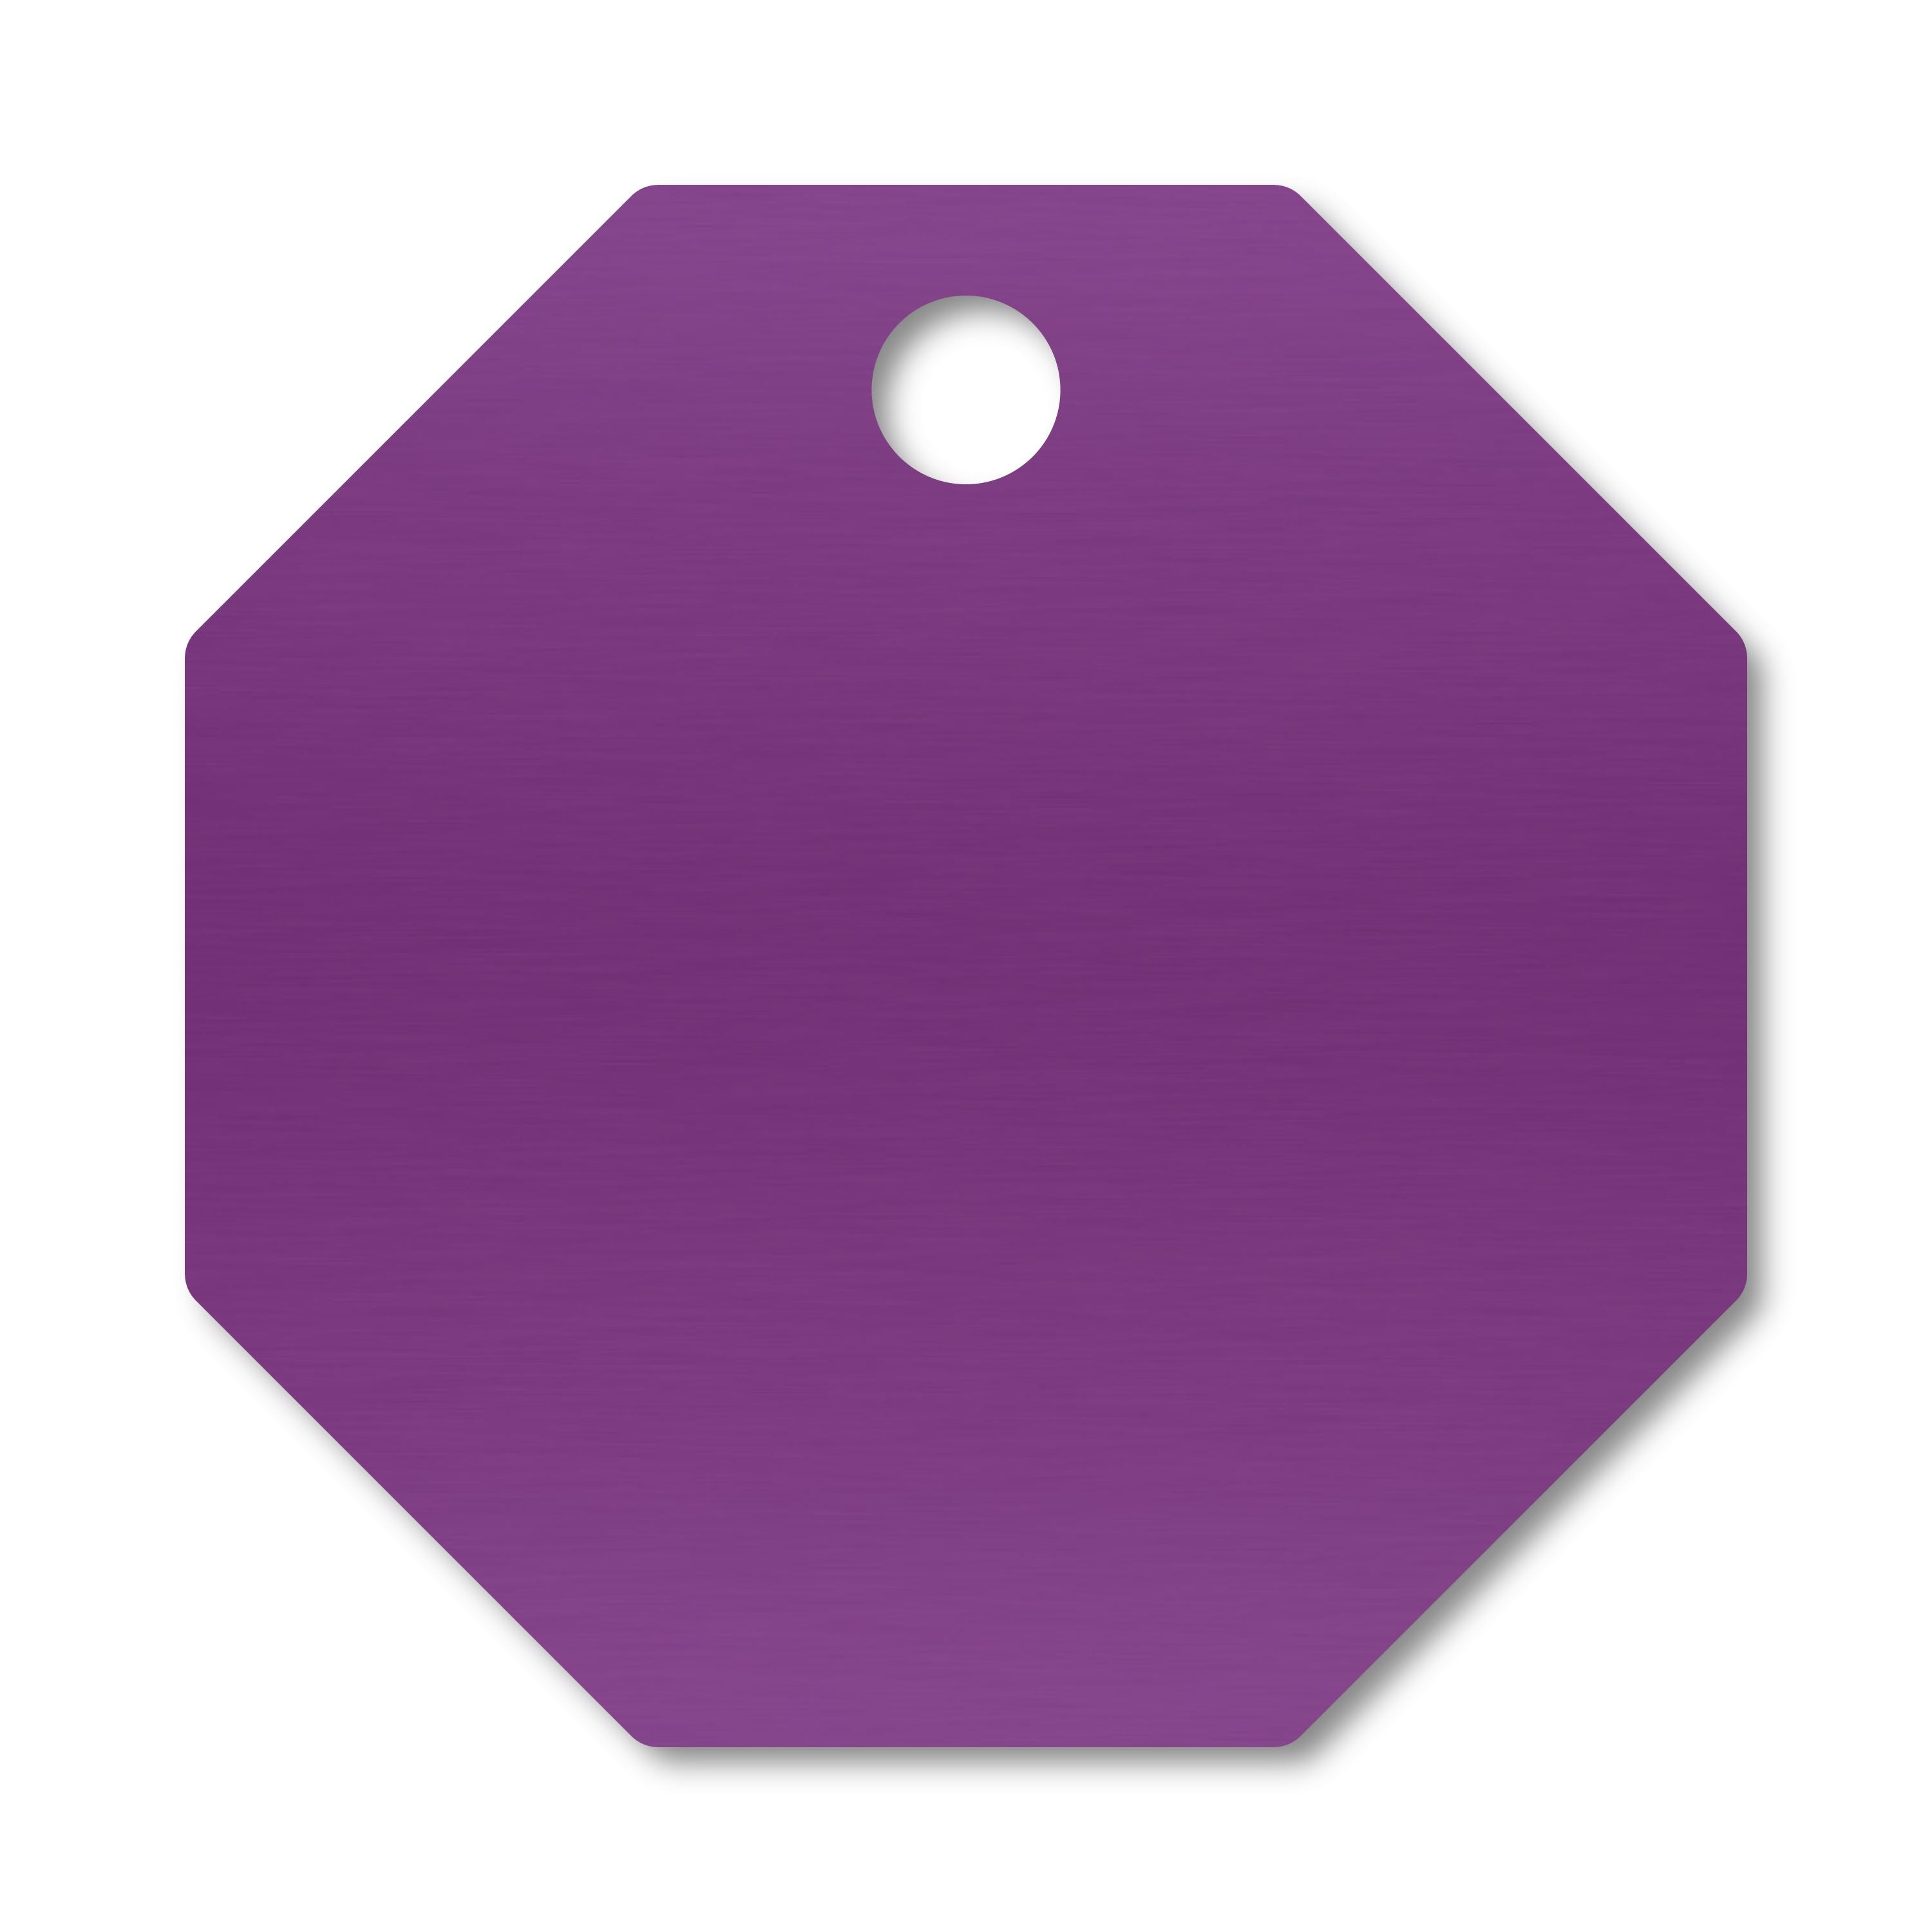 Anodized Aluminum Octagon Tags, 1" with 3/32" Hole, Laser Engraved Metal Tags Craftworks NW Purple 